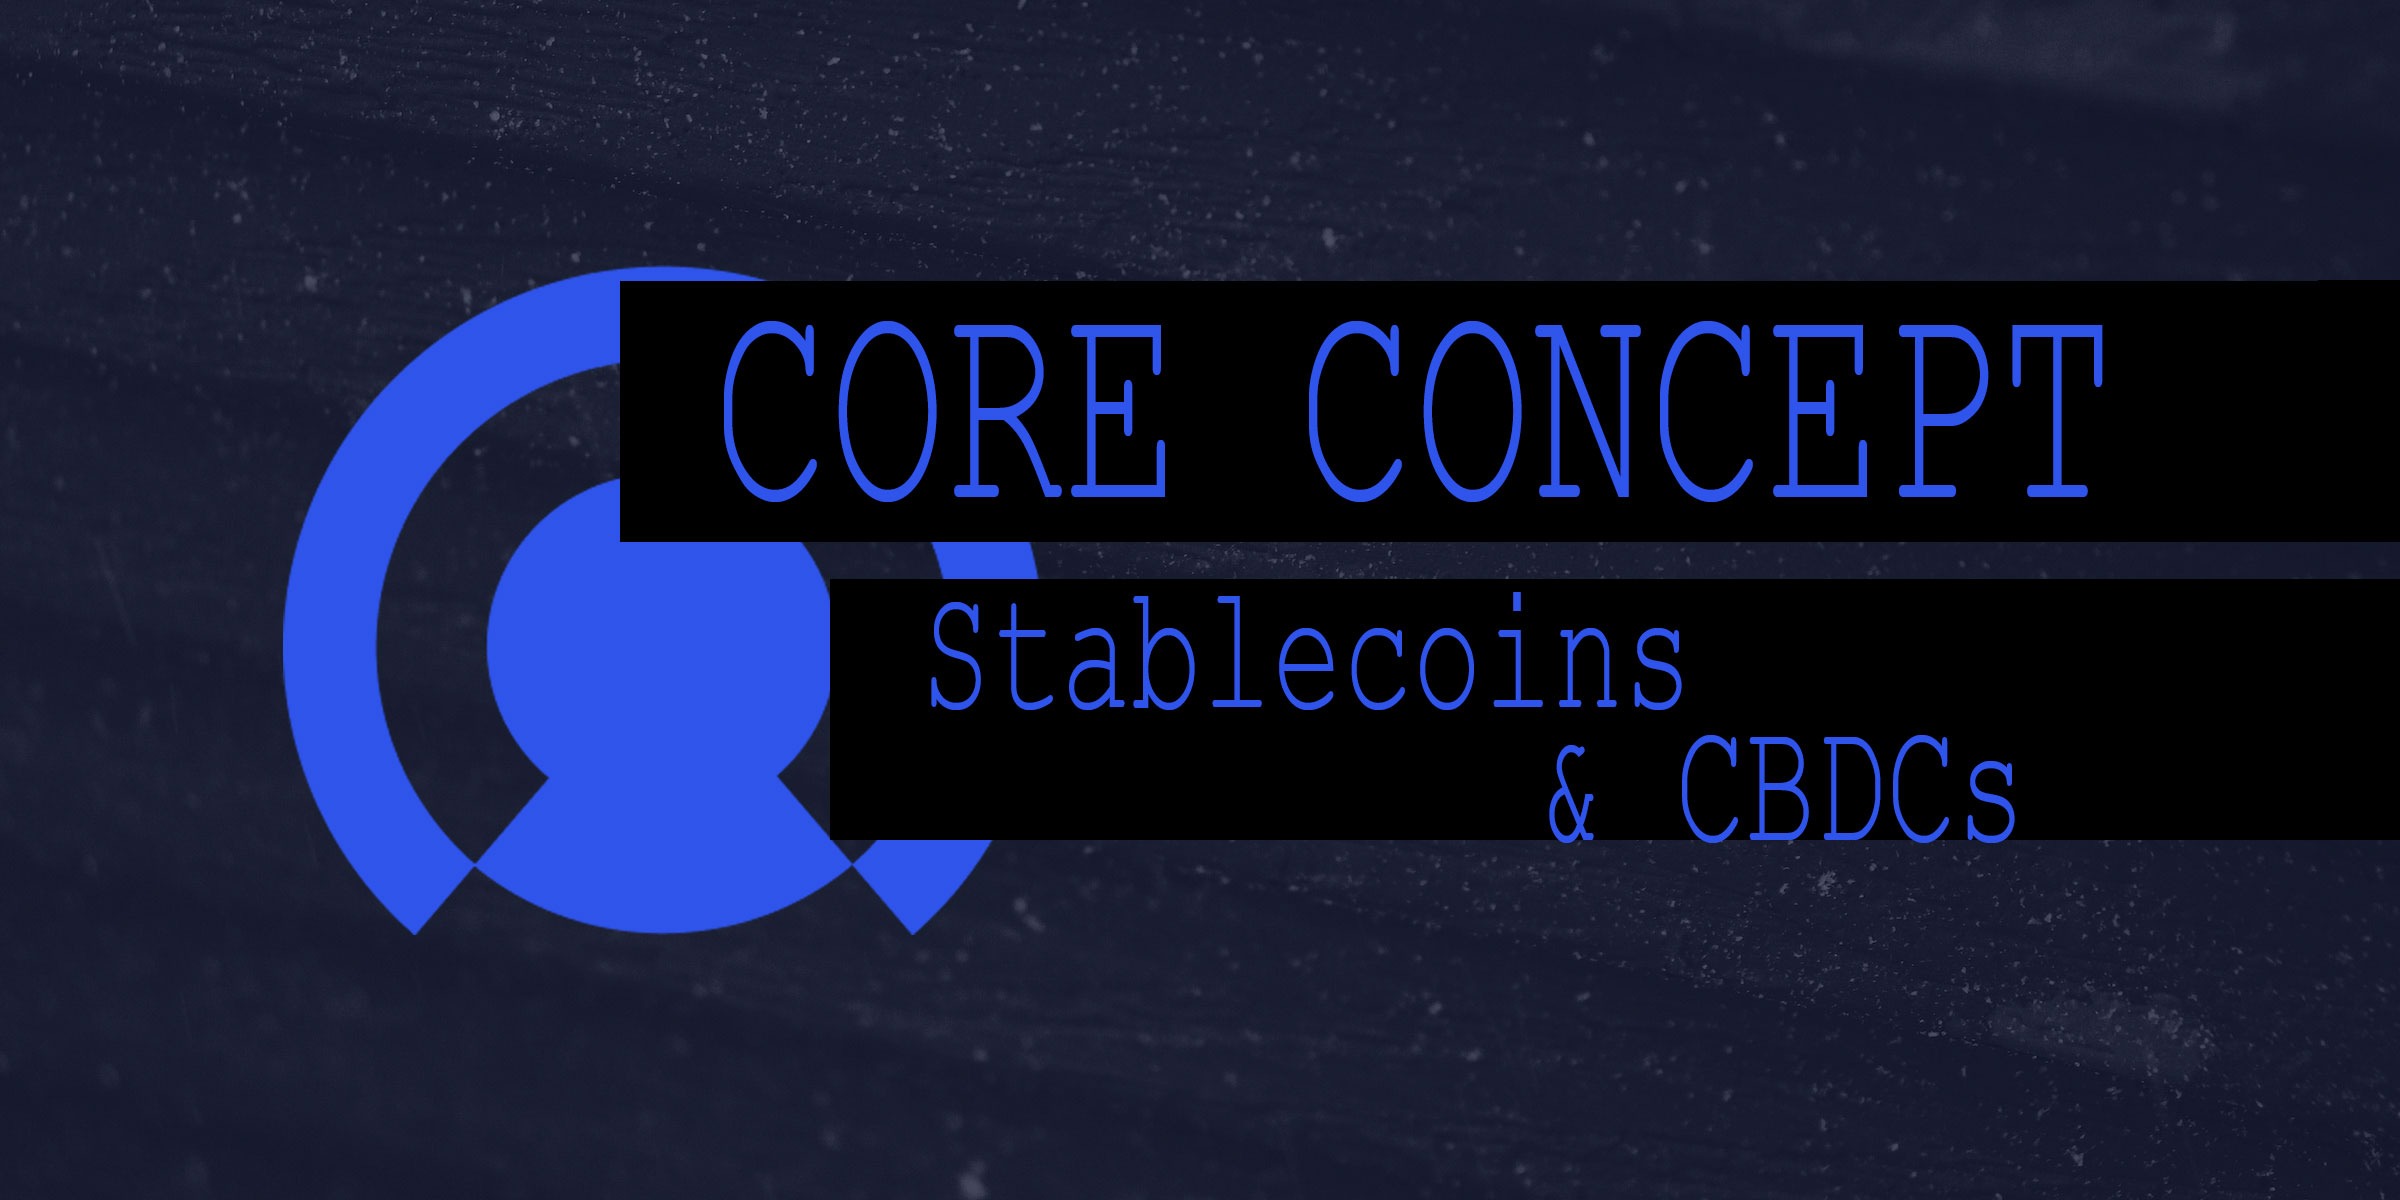 What is a stablecoin & CBDC?